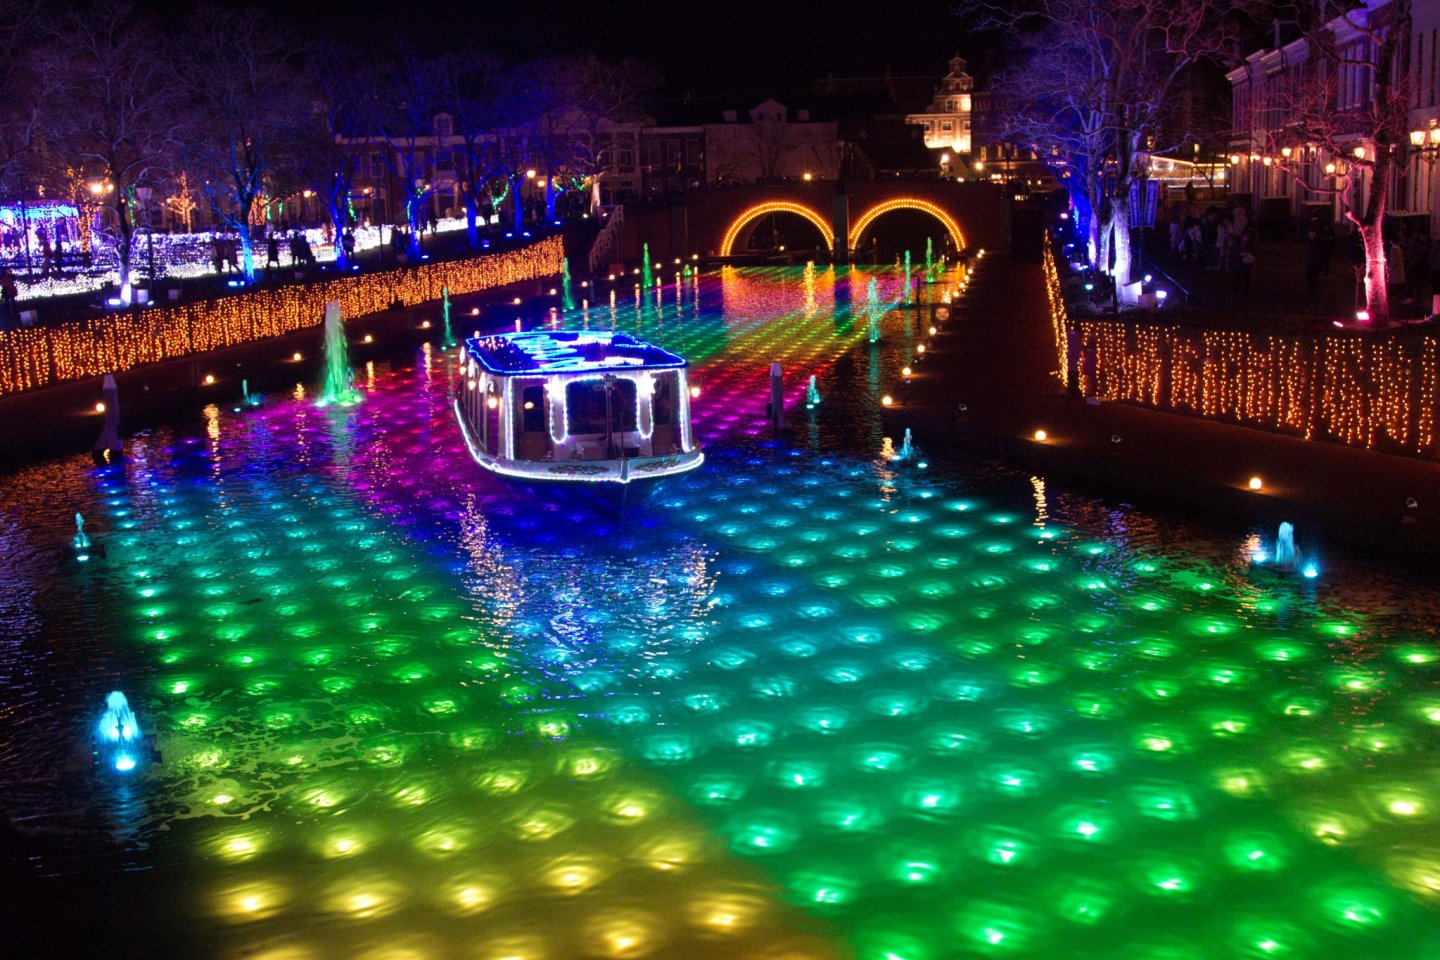 Huis Ten Bosch is pretty famous for the amazing night illuminations